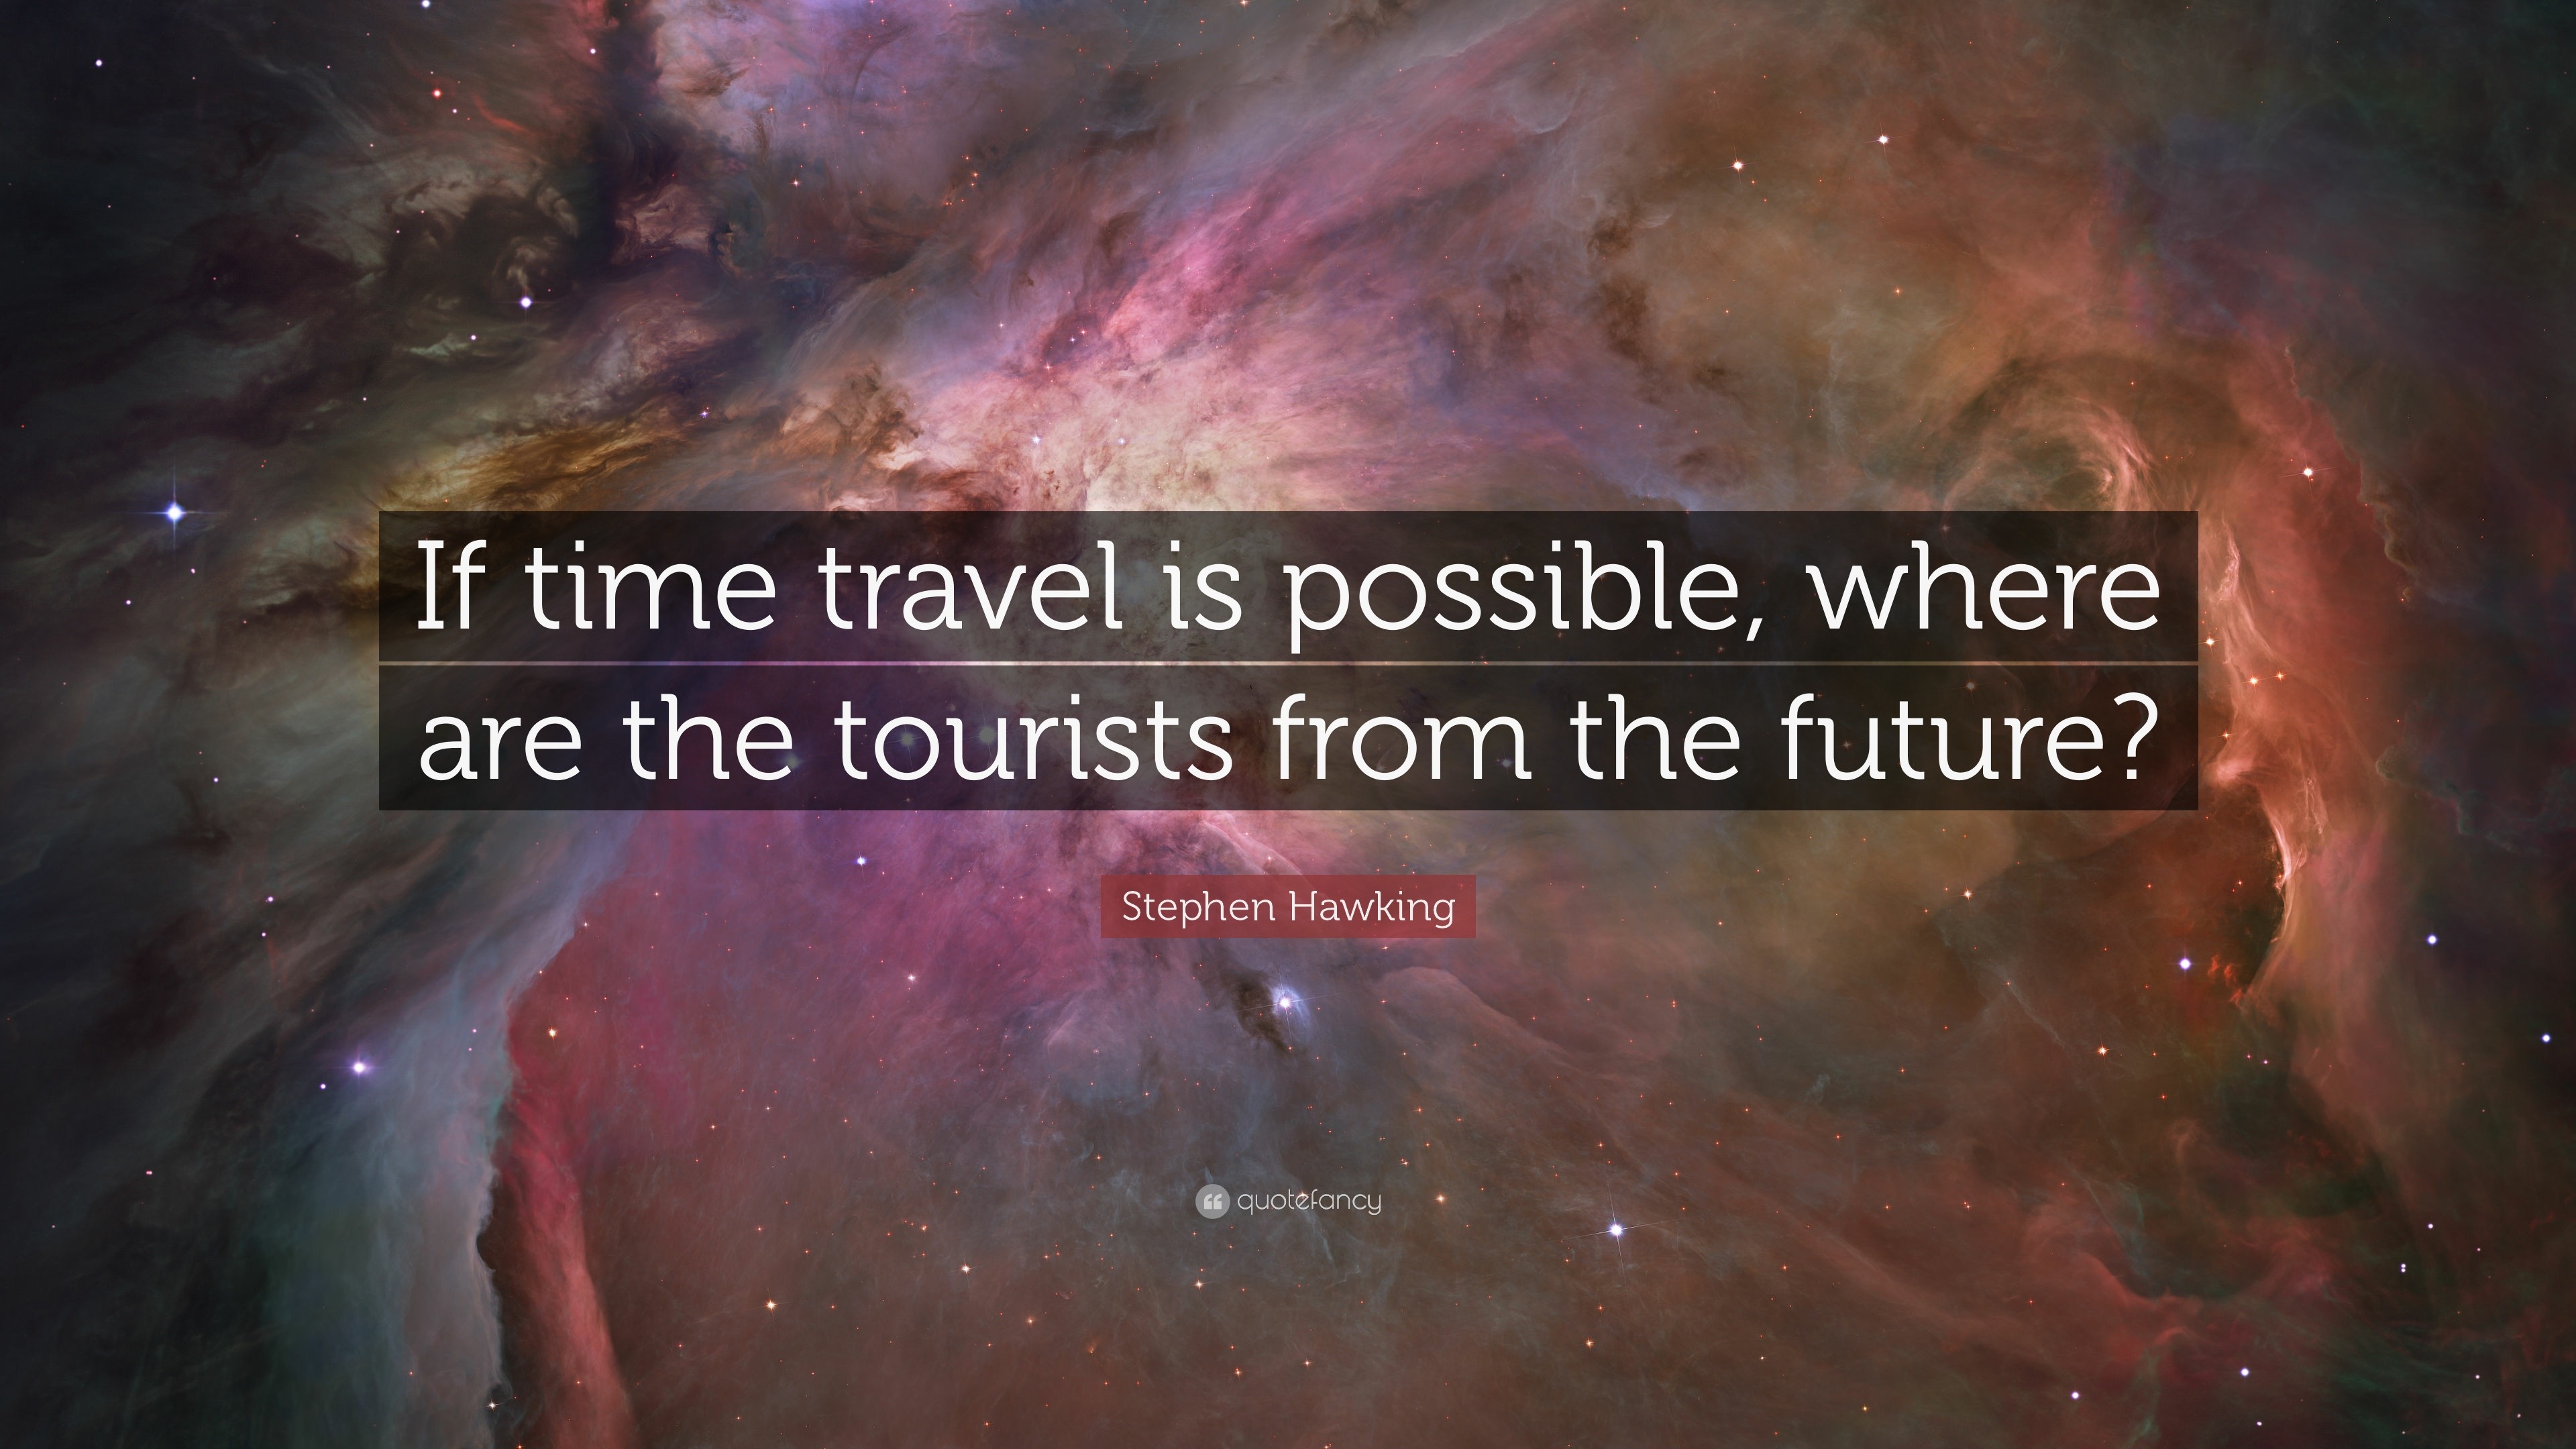 if time travel was possible where would you go